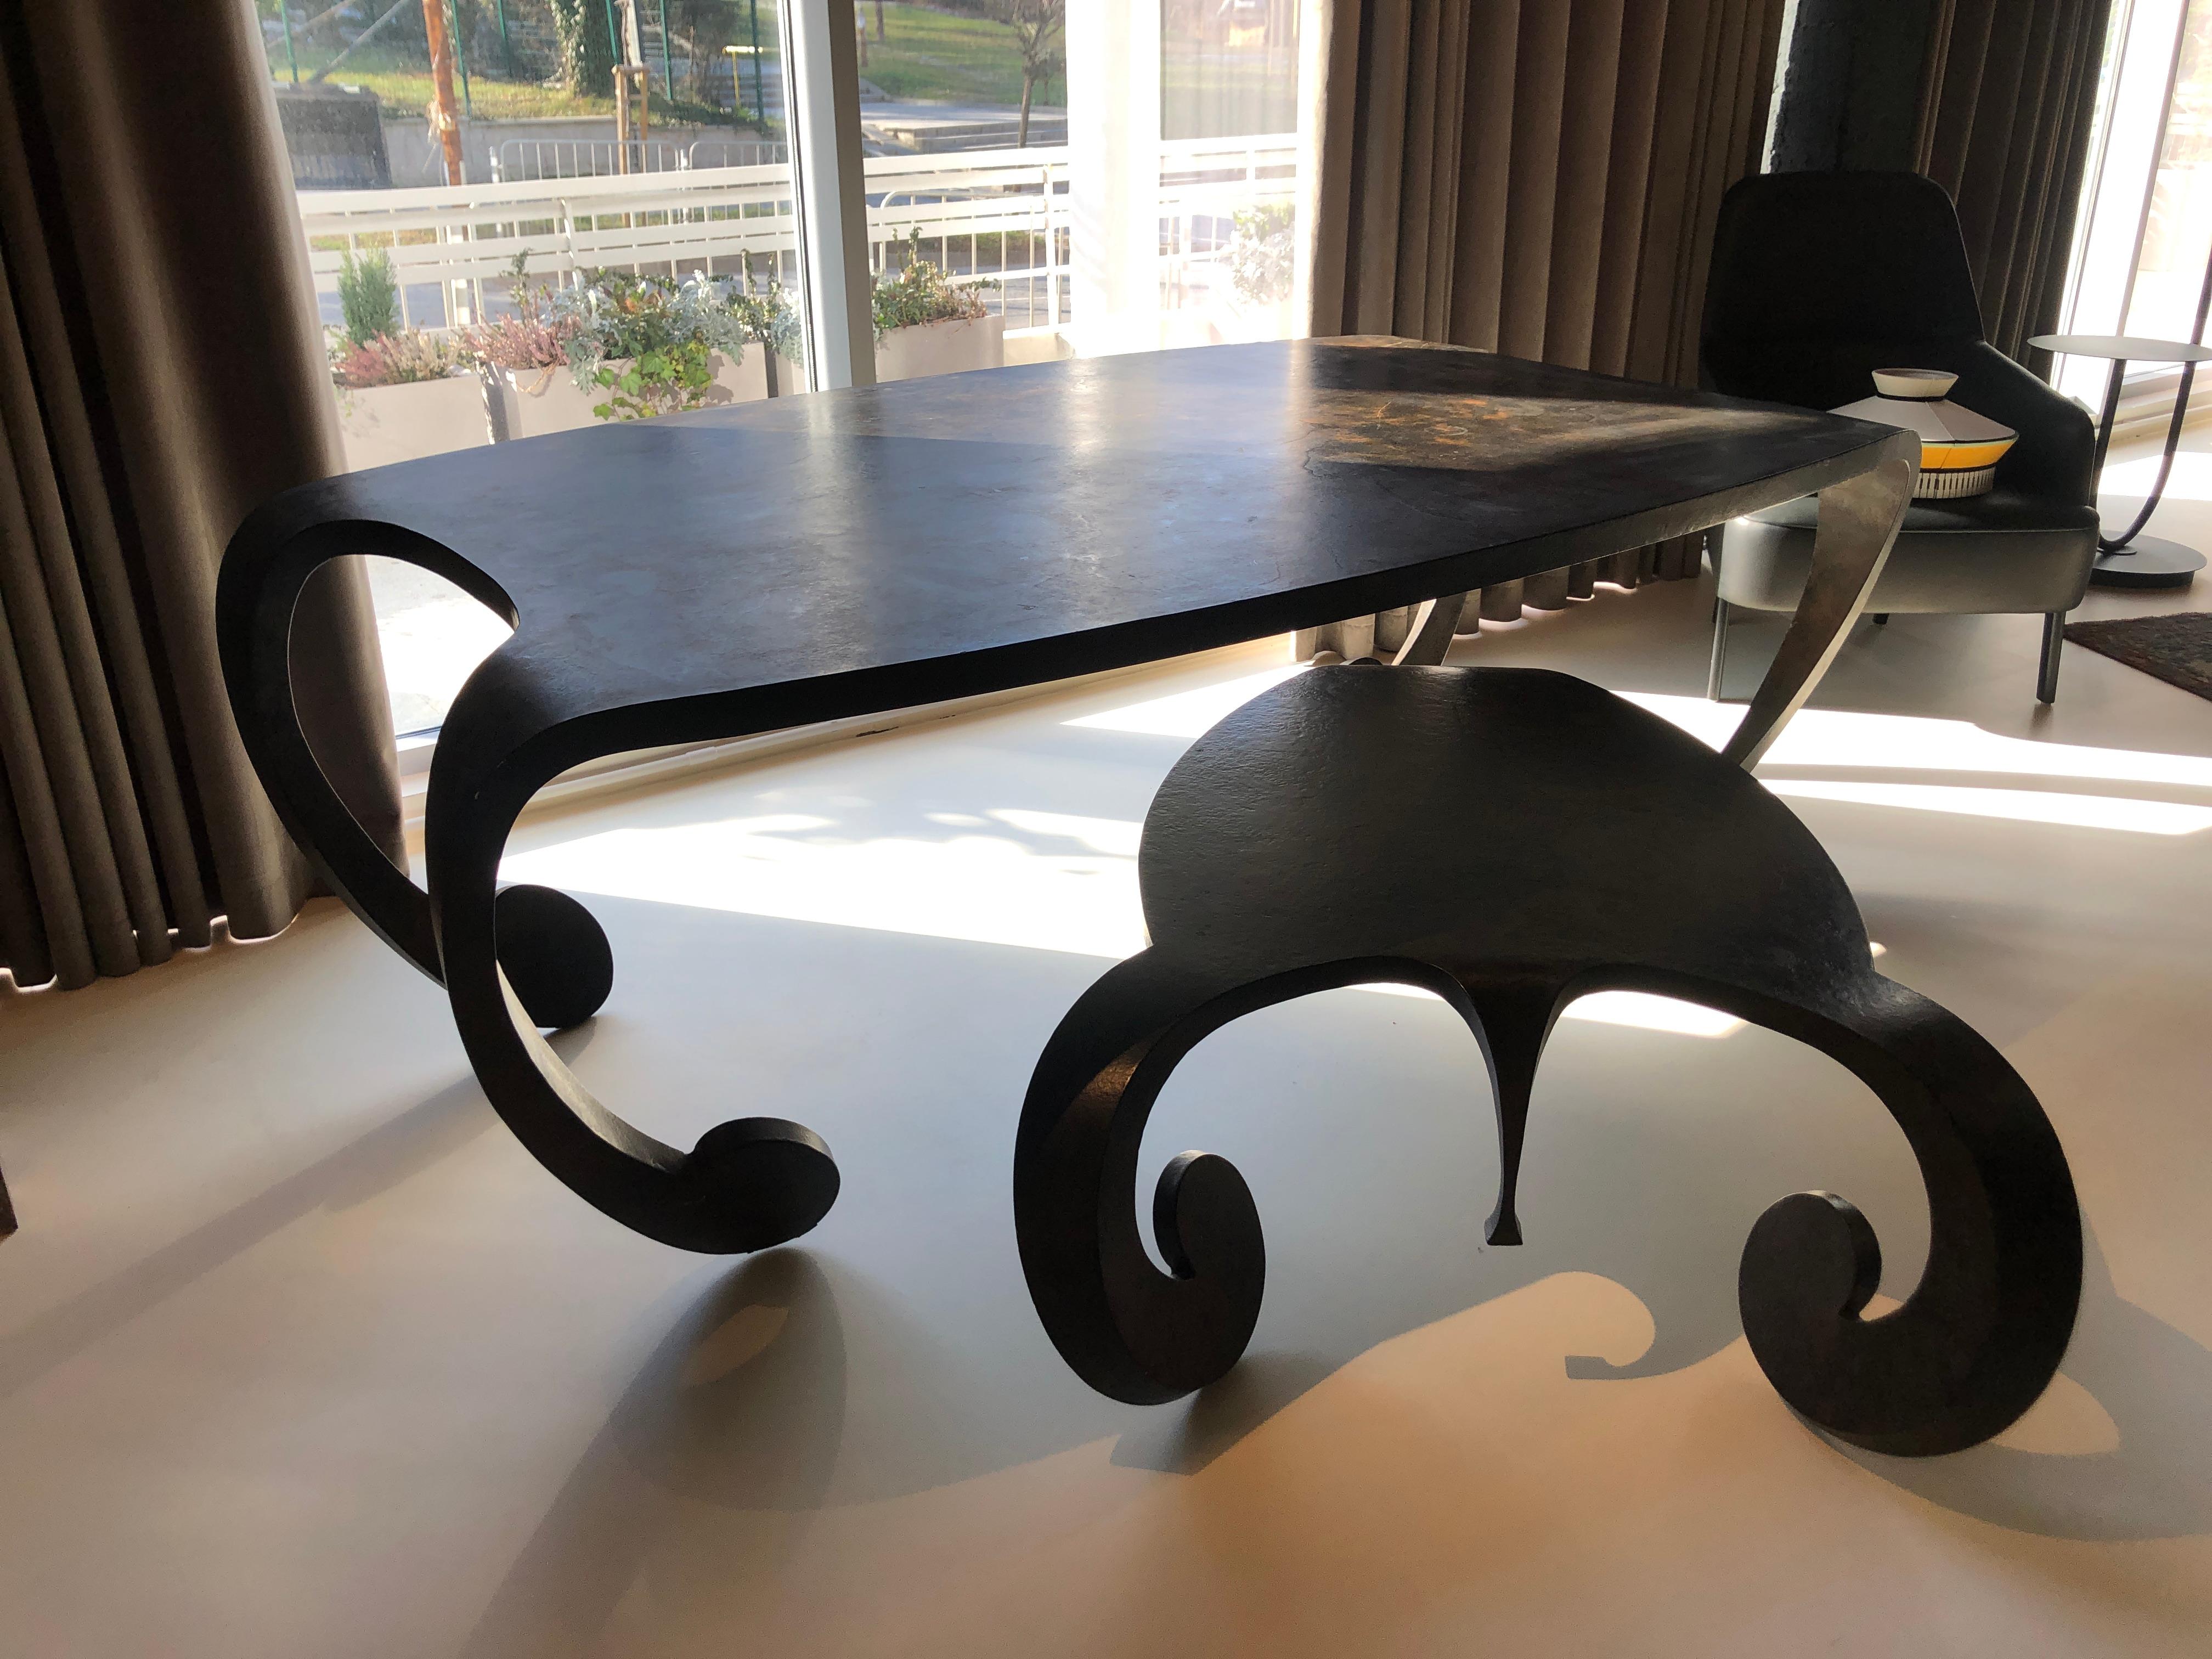 Extraordinary low table made of folded and welded metal in original color.
The model is called 